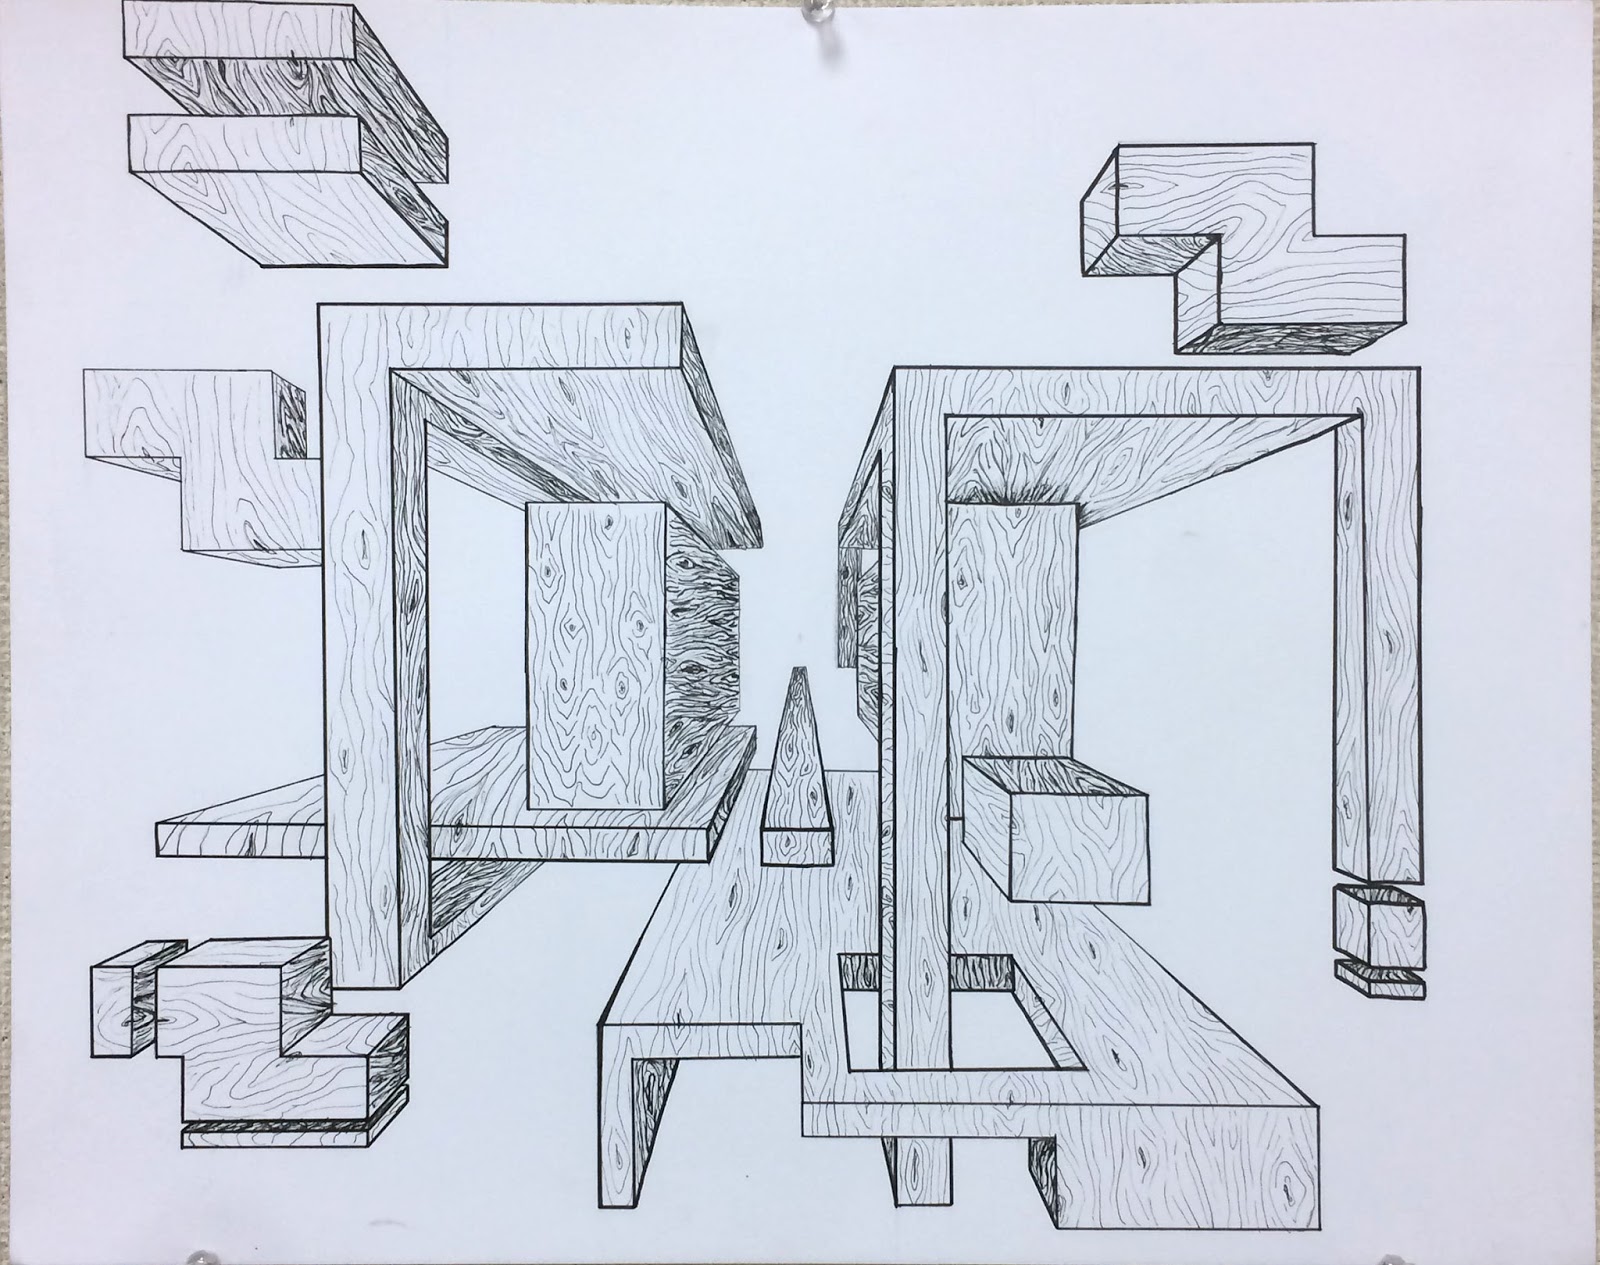 Art 3 Intro To Art And Design With William Smith Linear Perspective